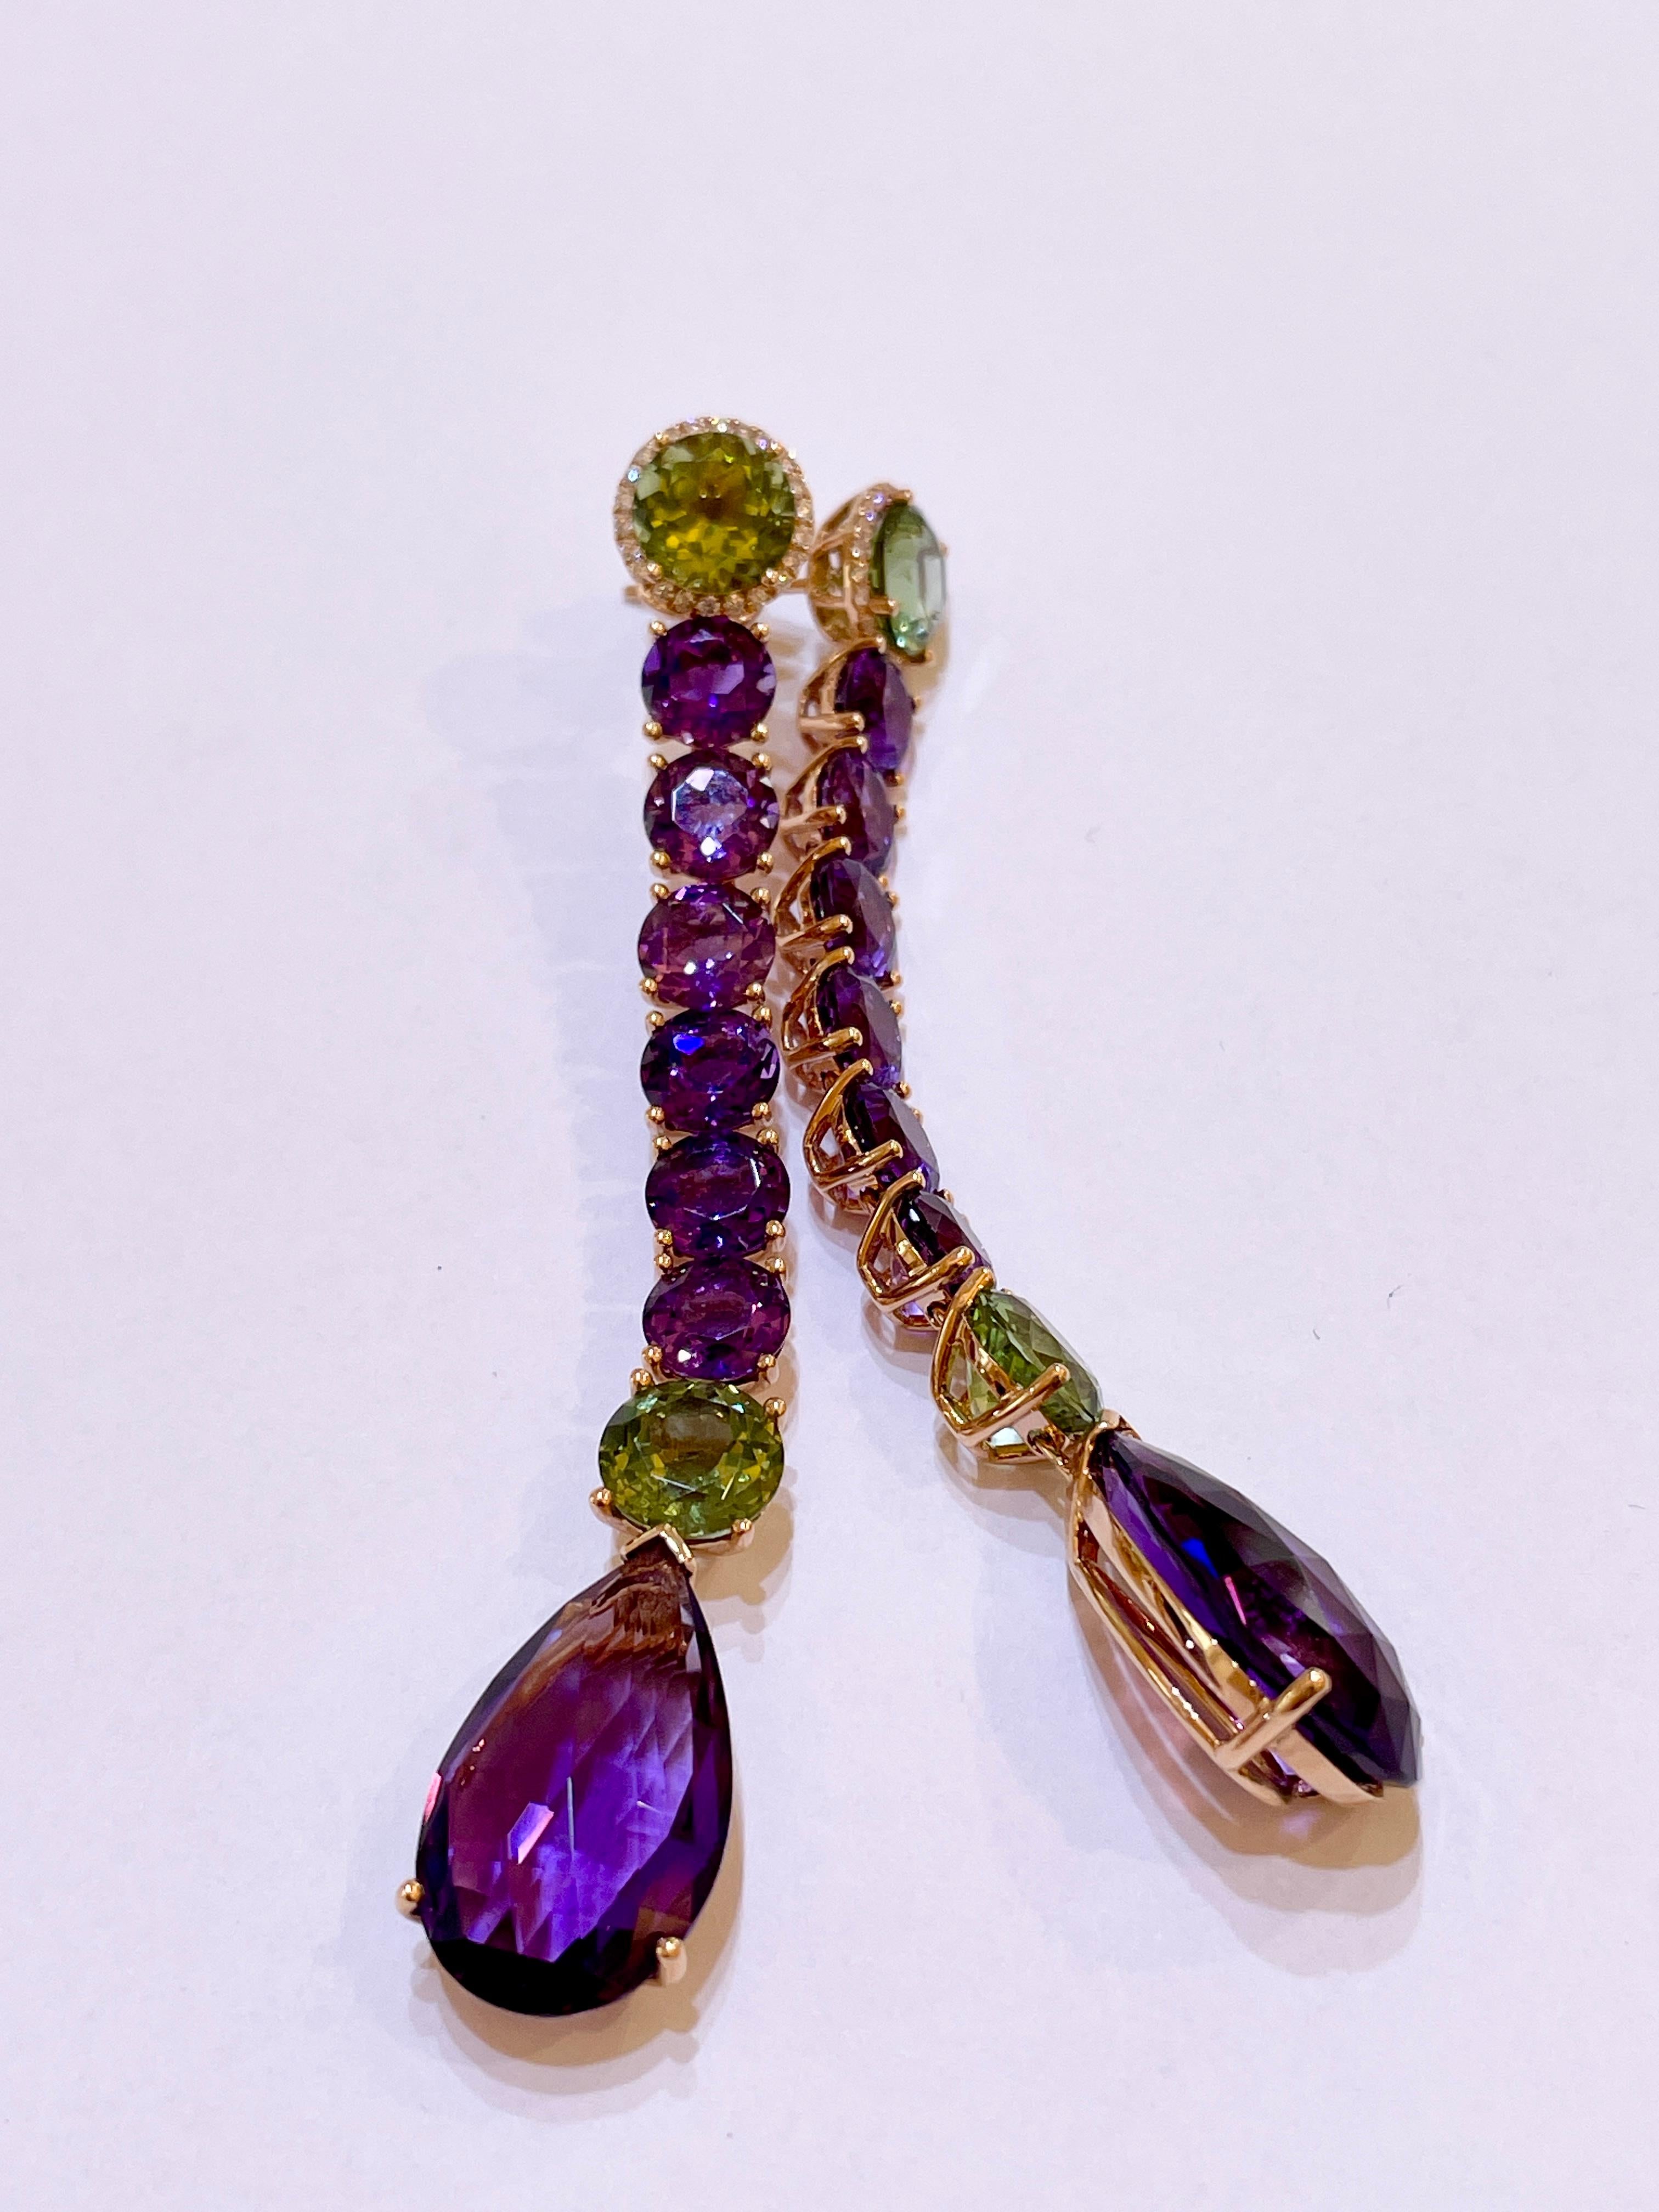 These beautiful long earrings with 47.67ct Amethyst, Peridot, and Diamonds are set in 18kt rose gold. They are a unique piece from our own workshop. 

The length of the earrings is 8.8cm. The earrings can also be shortened upon request.